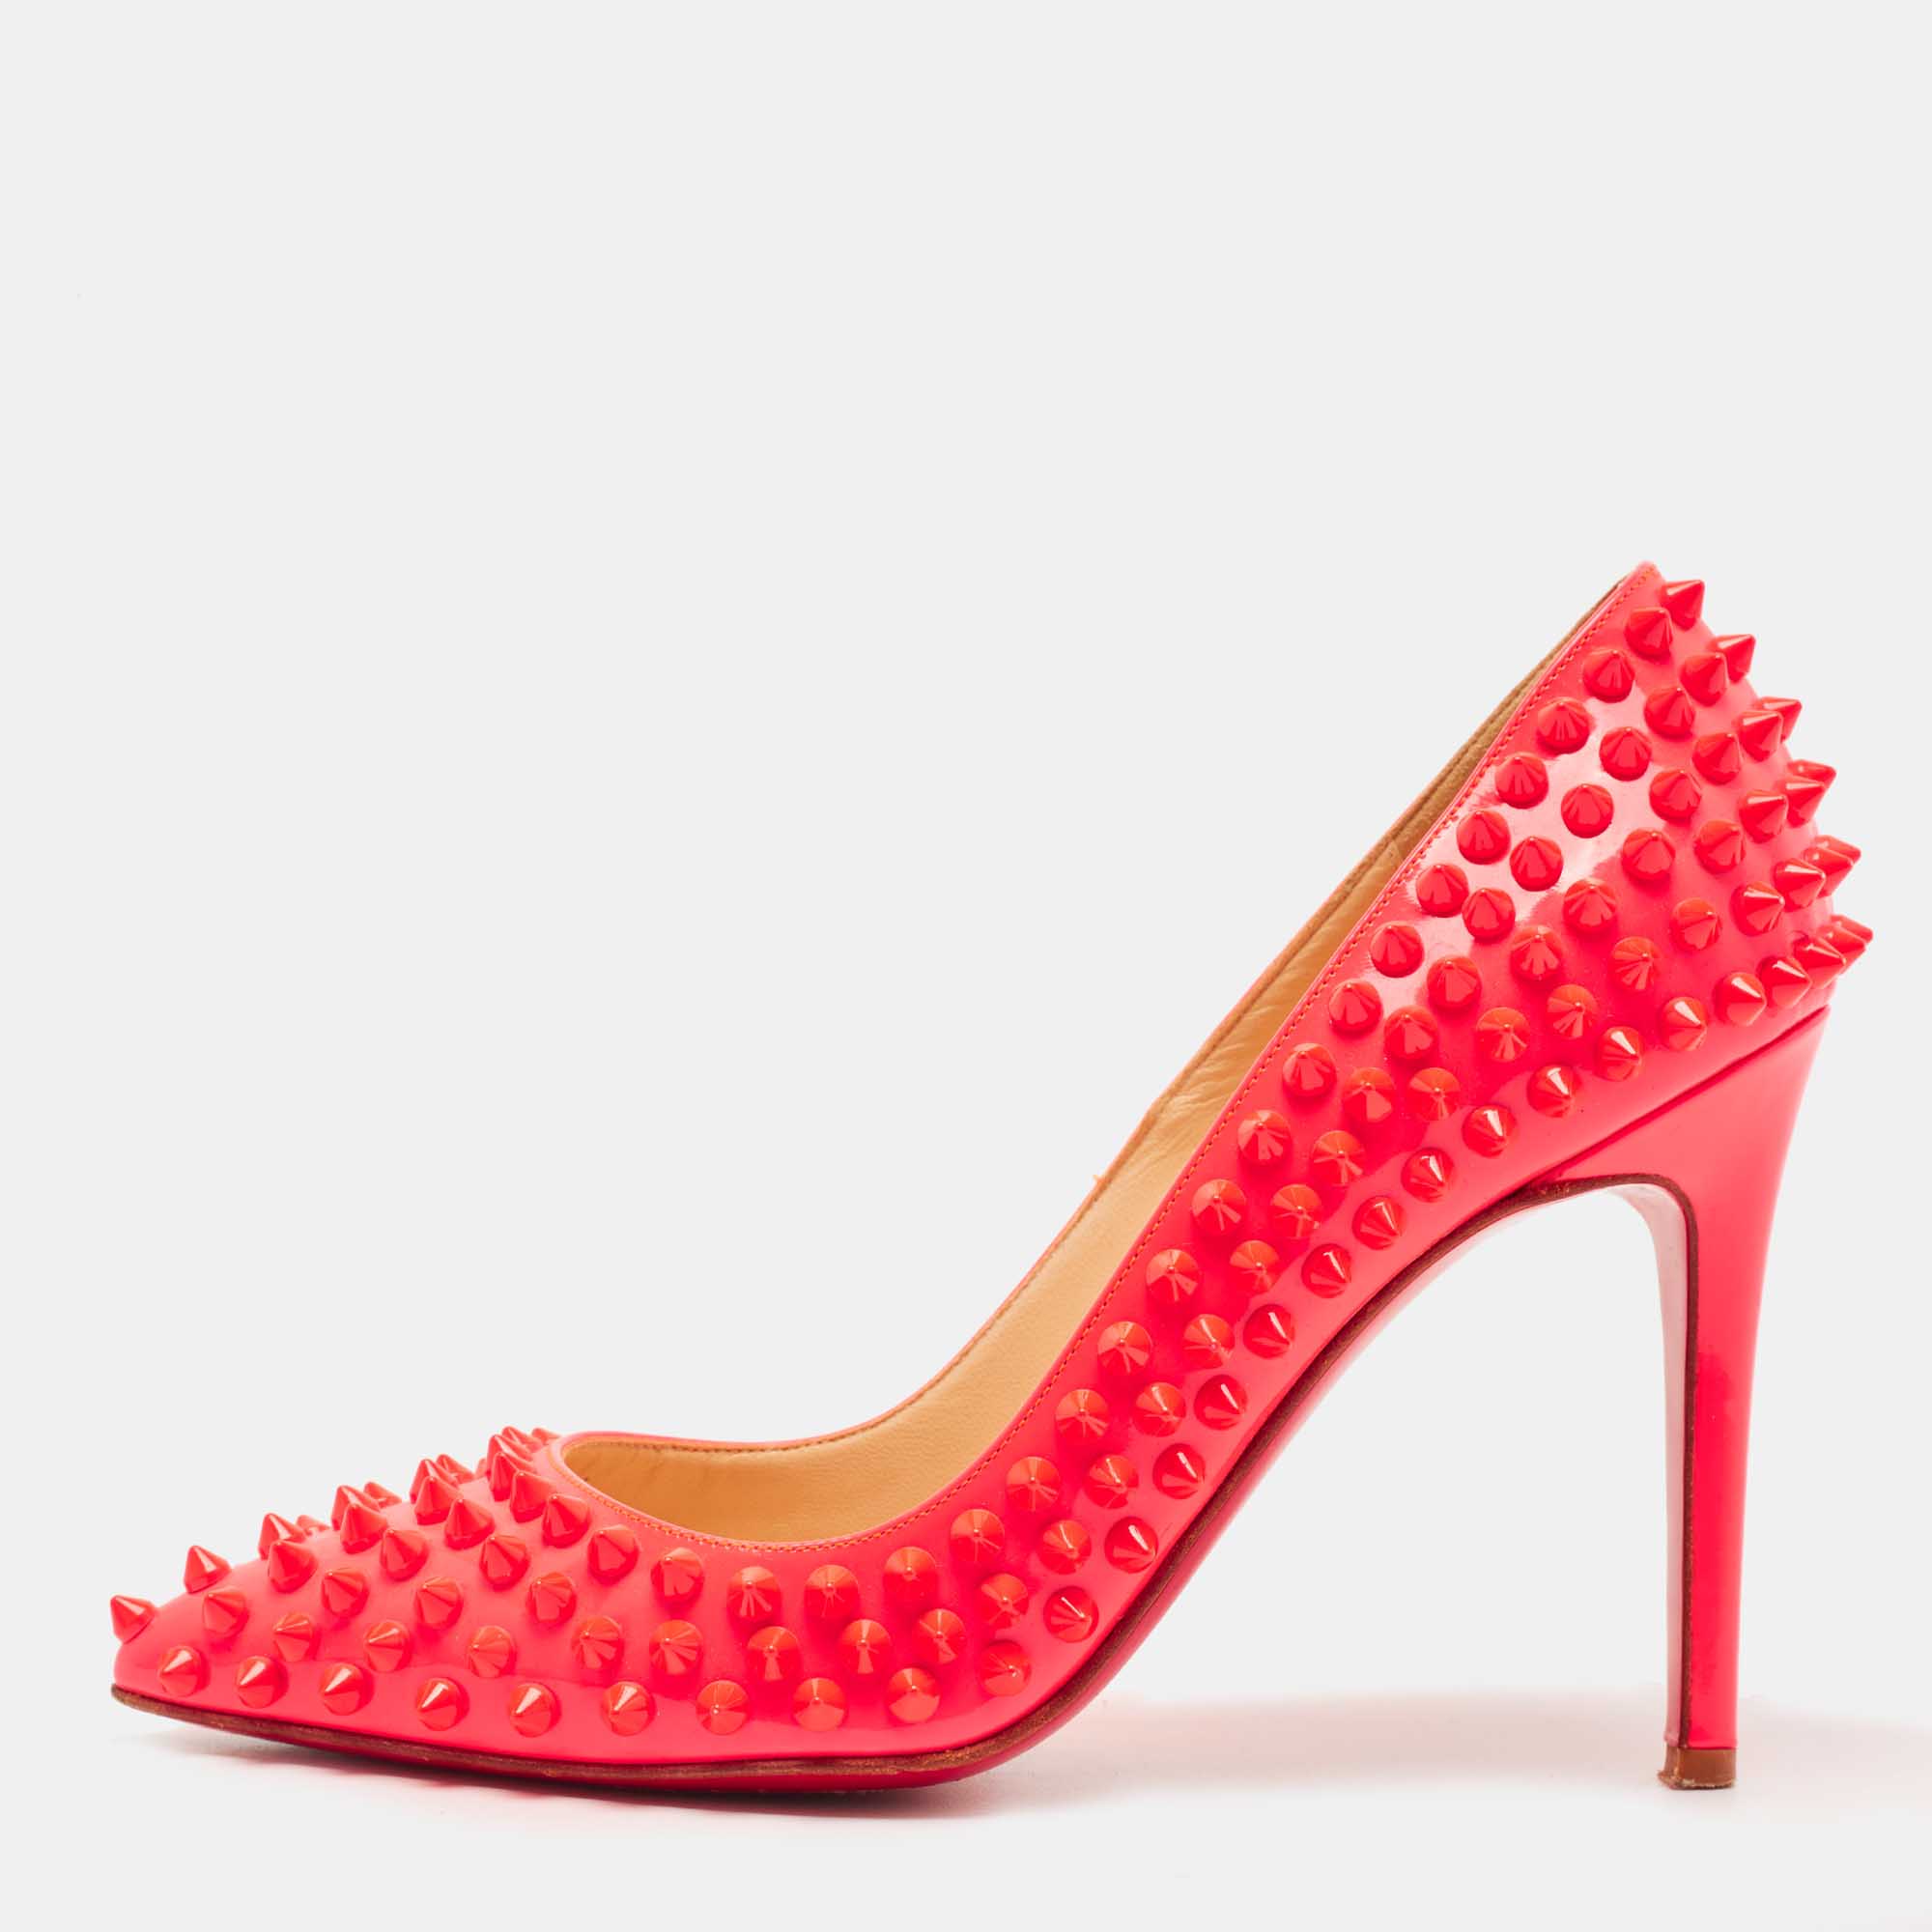 

Christian Louboutin Neon Pink Patent Leather Fifi Spike Pumps Size